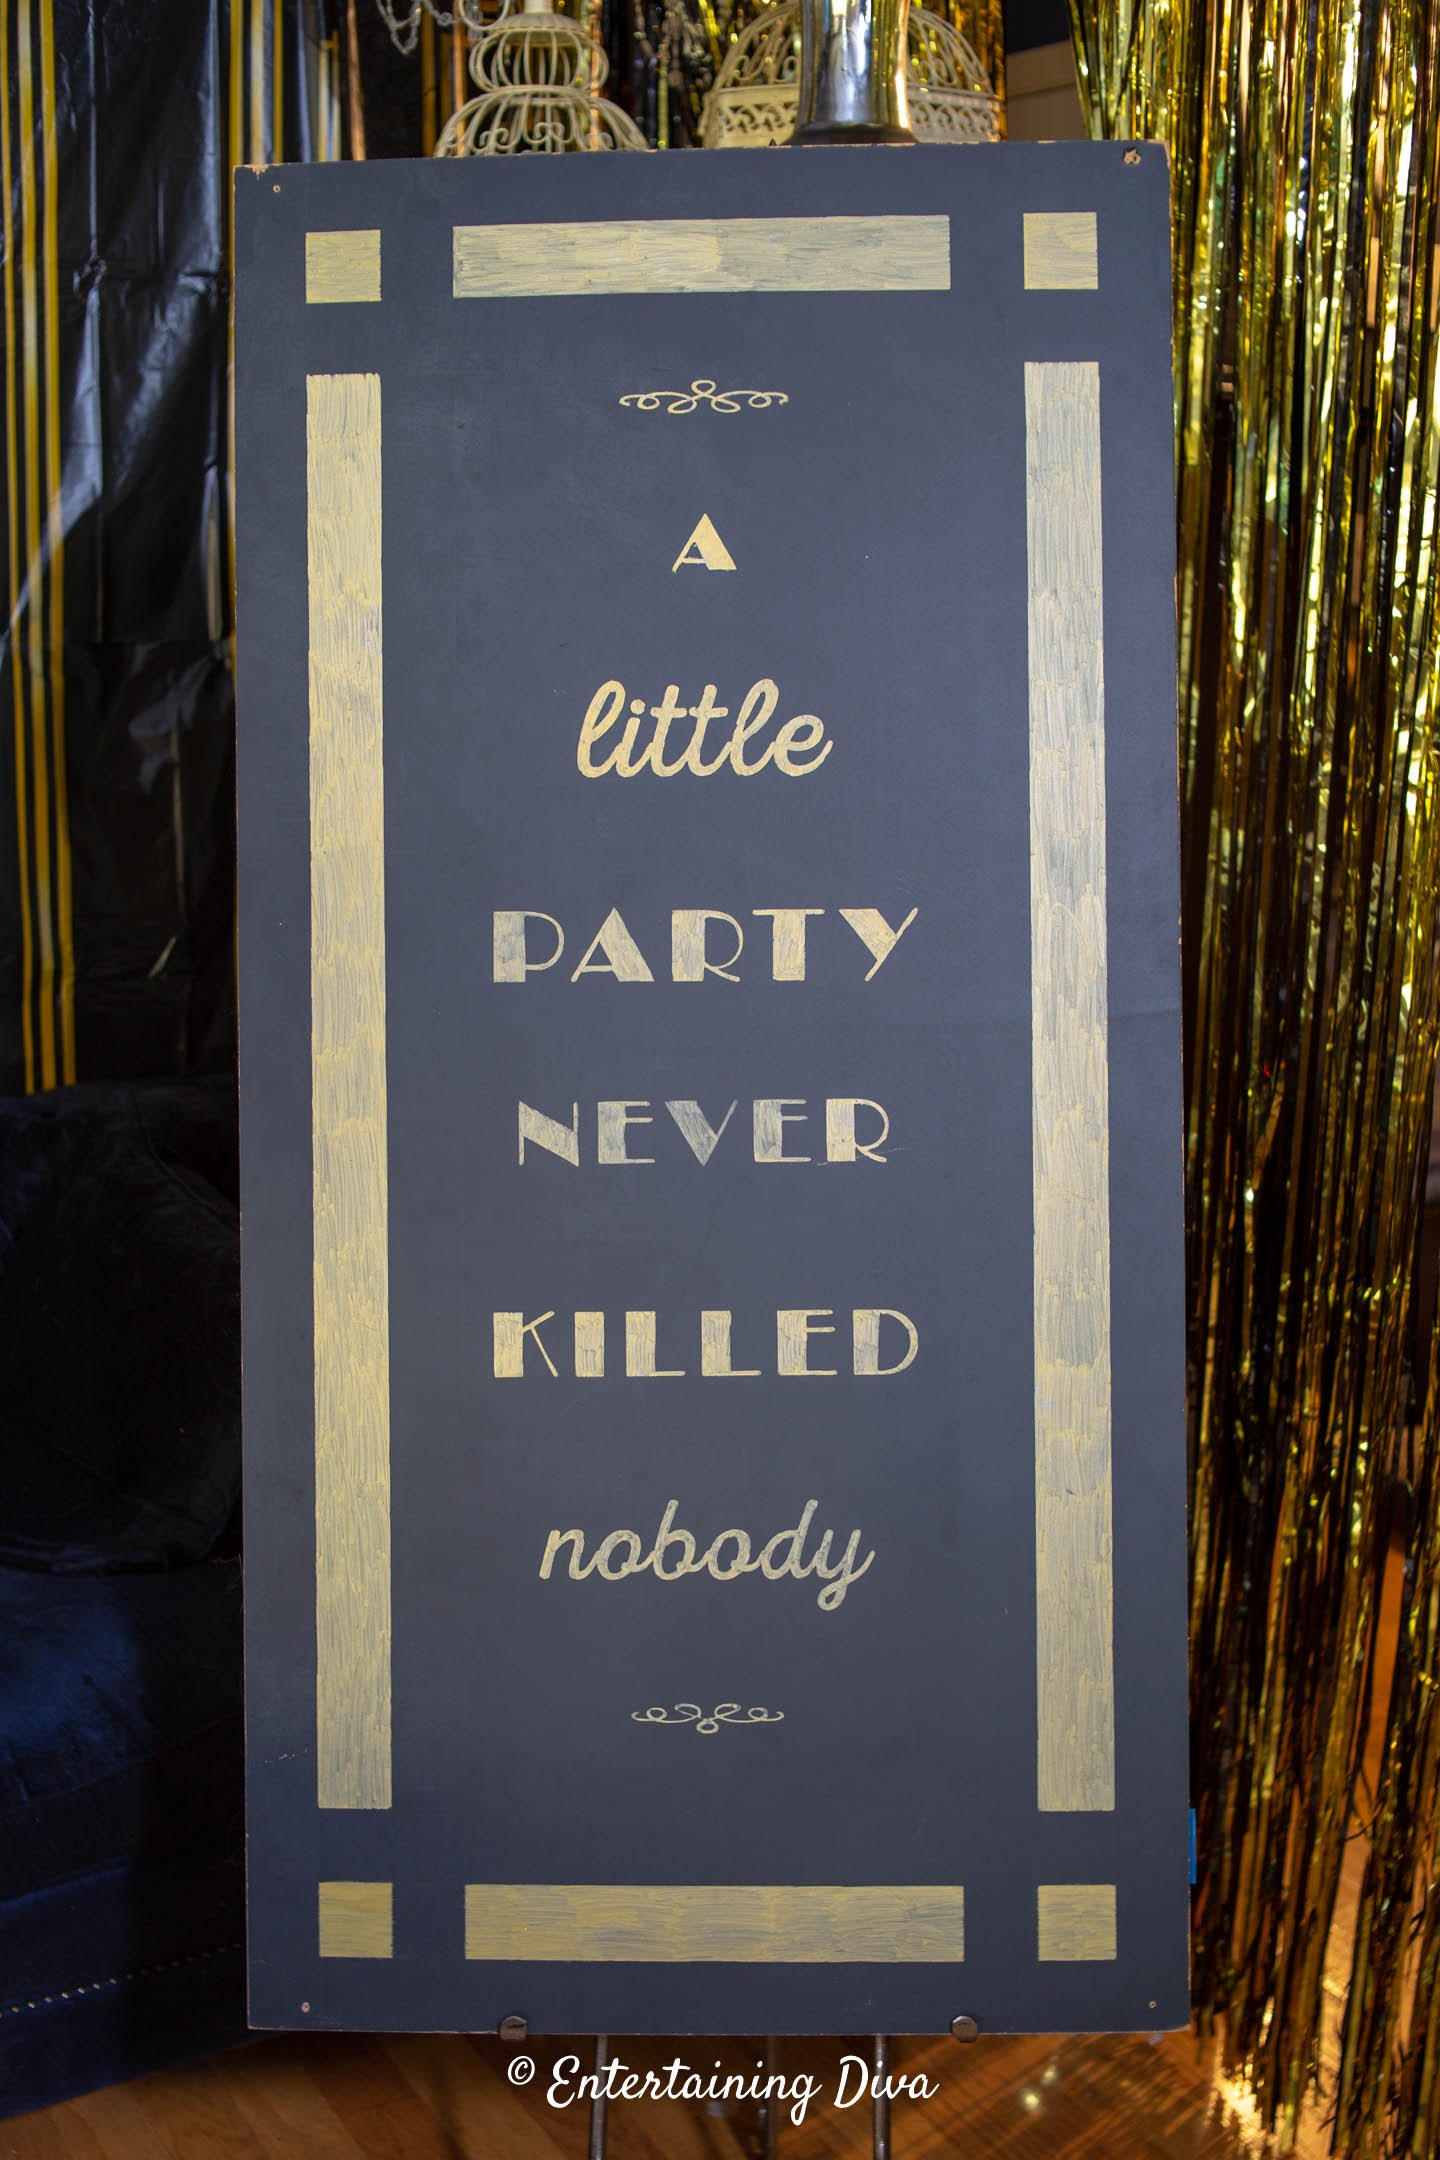 DIY Gatsby blackboard sign that says "A little party never killed nobody"